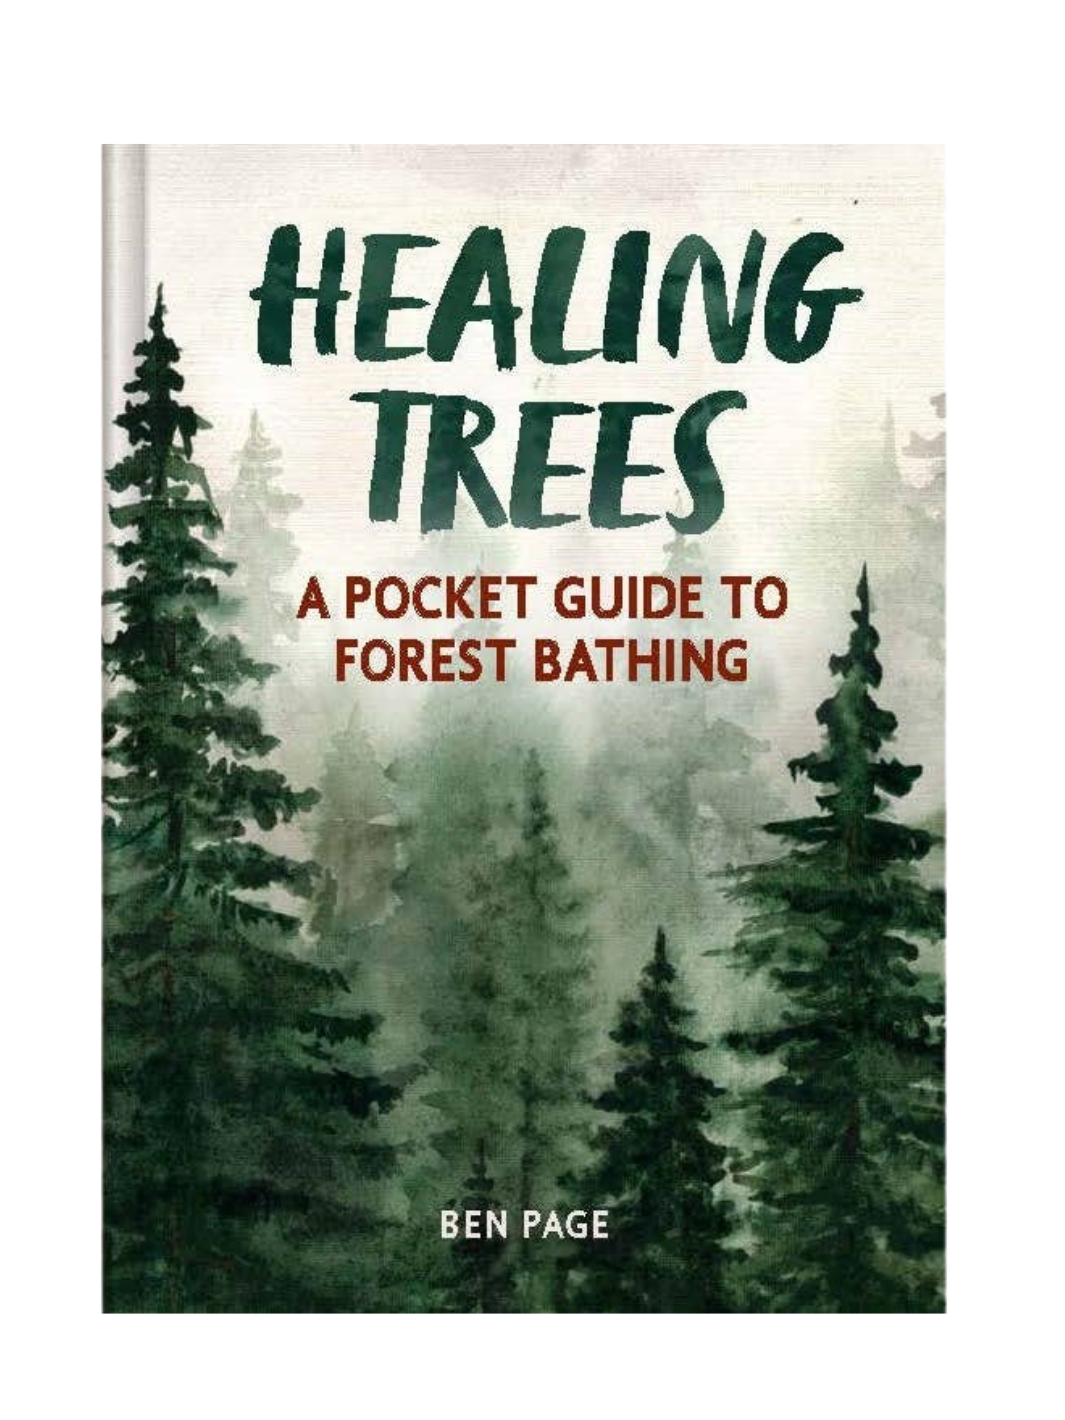 Healing Trees Guide to Forest Bathing